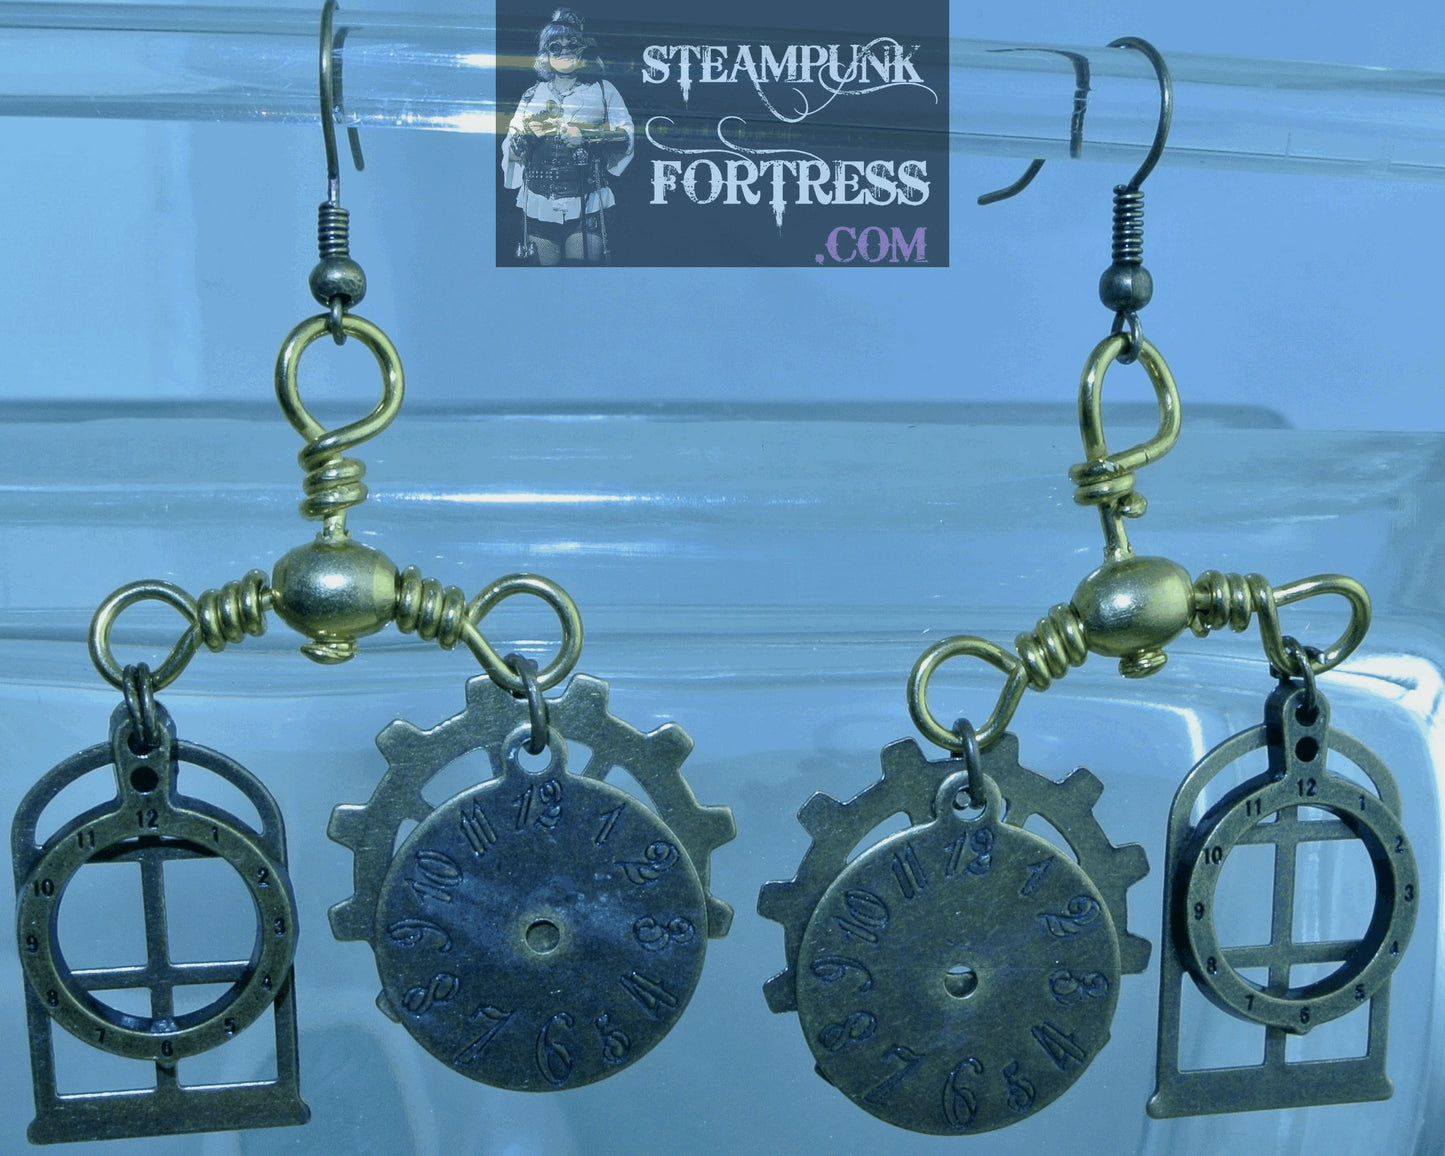 BRASS WINDOW 2 CLOCK FACES WATCH DIALS AUTHENTIC GENUINE GEARS PIERCED EARRINGS SET AVAILABLE STARR WILDE STEAMPUNK FORTRESS